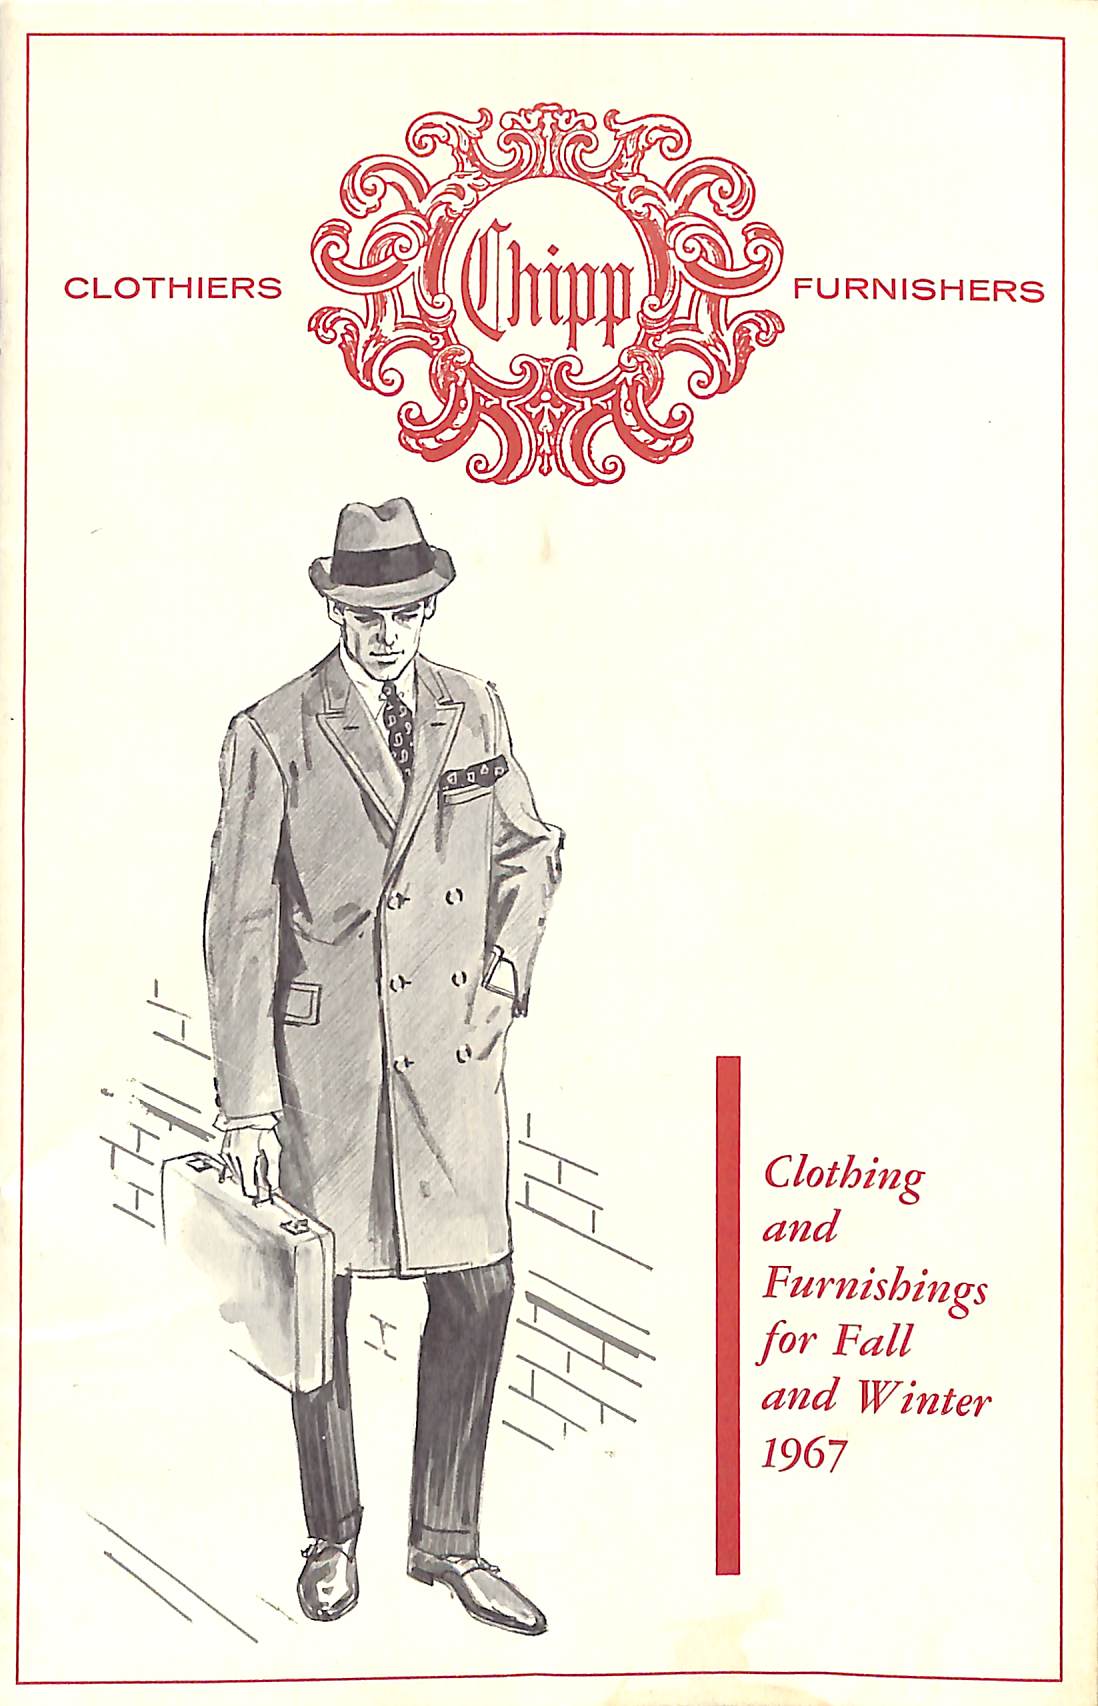 "Chipp Clothing And Furnishings For Fall And Winter" 1967 Catalog